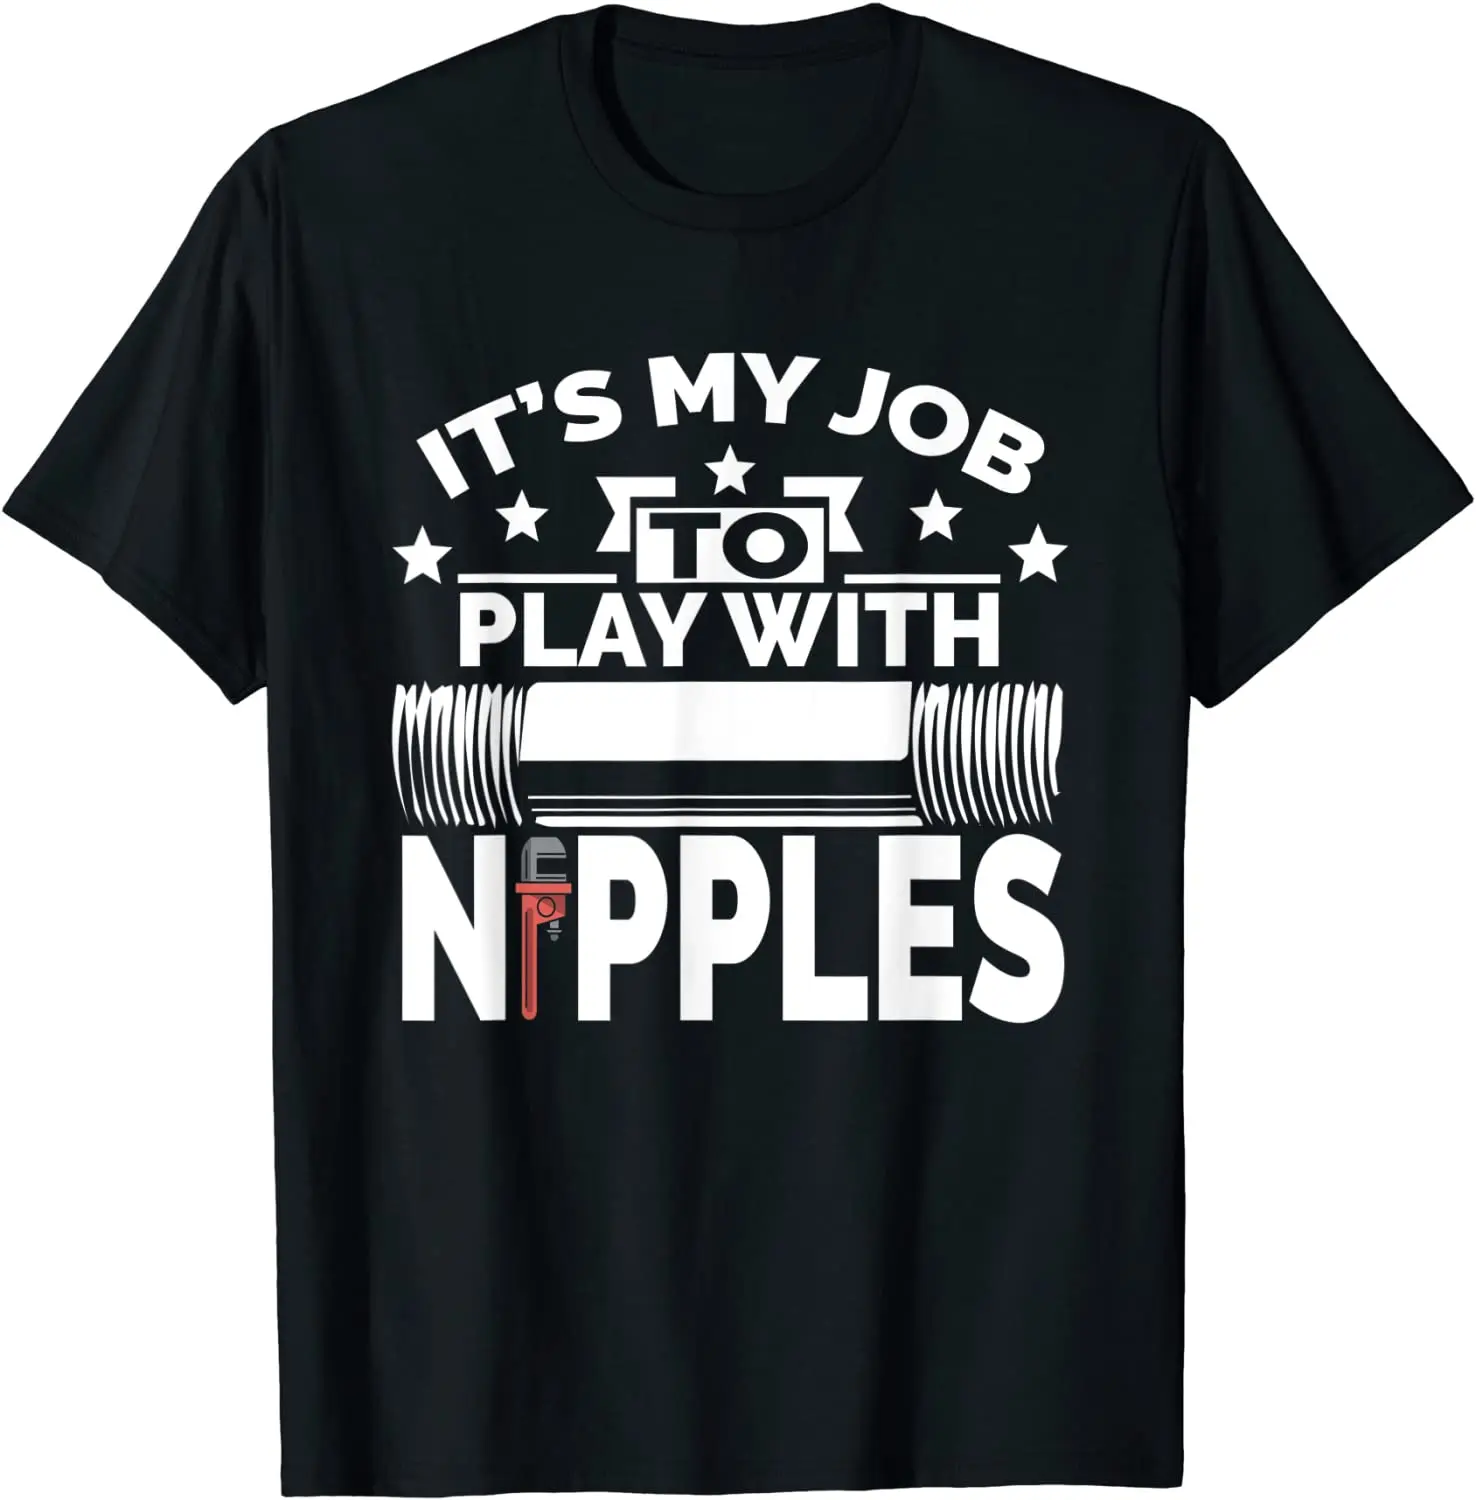 Play With Nipples | Funny  + Pipefitter T-Shirt Wholesale Men's T Shirts Printed On Tops Shirts Cotton Summer